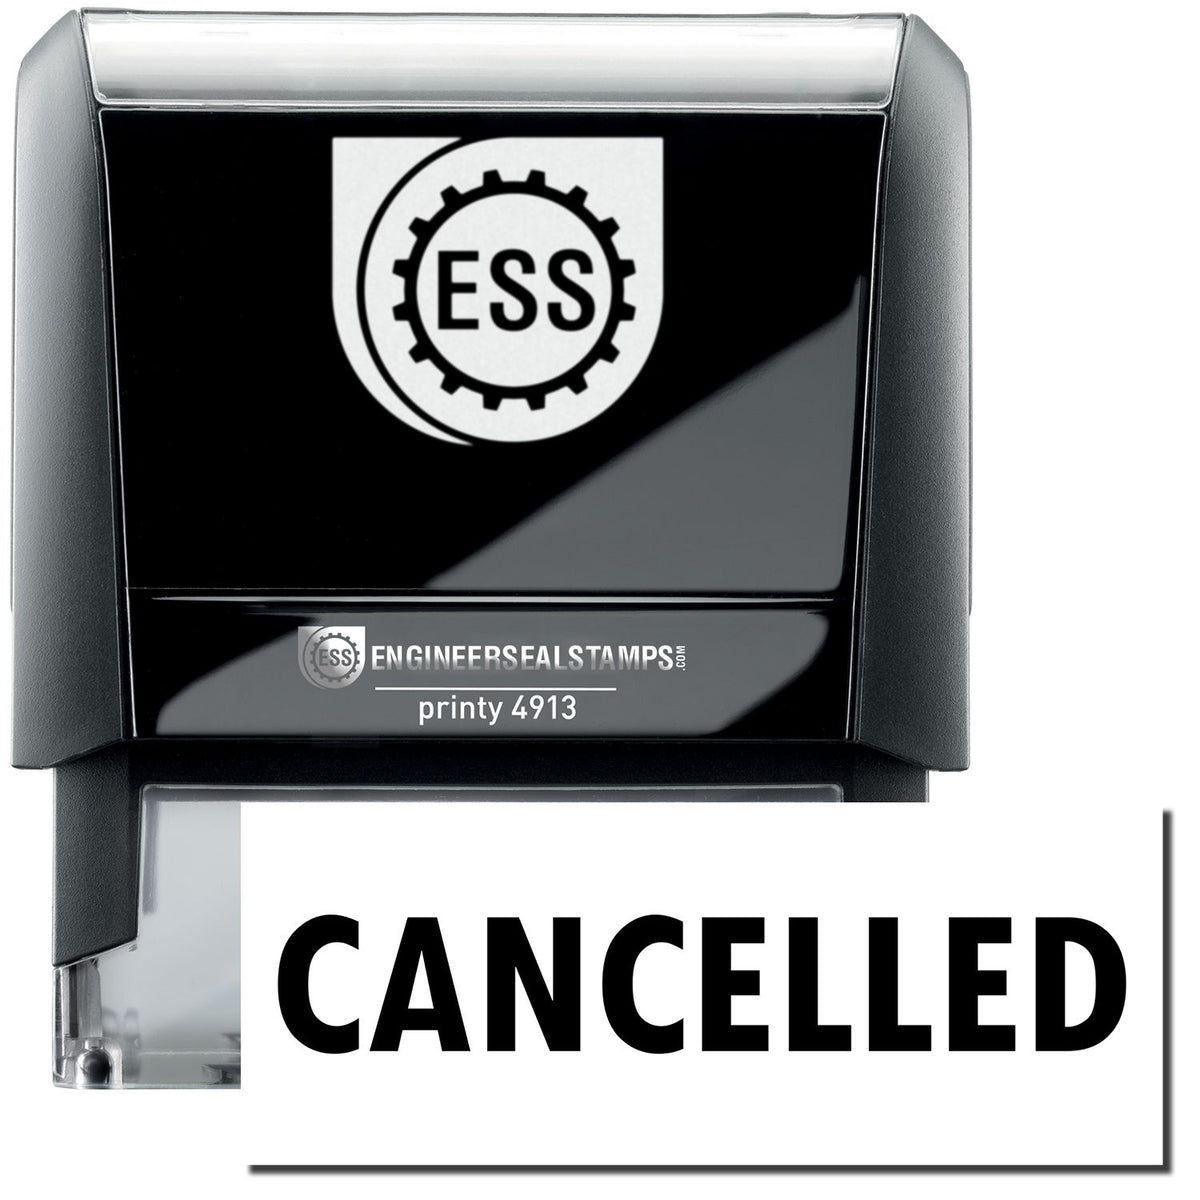 A large self-inking stamp with a stamped image showing how the text &quot;CANCELLED&quot; in a large bold font is displayed by it.